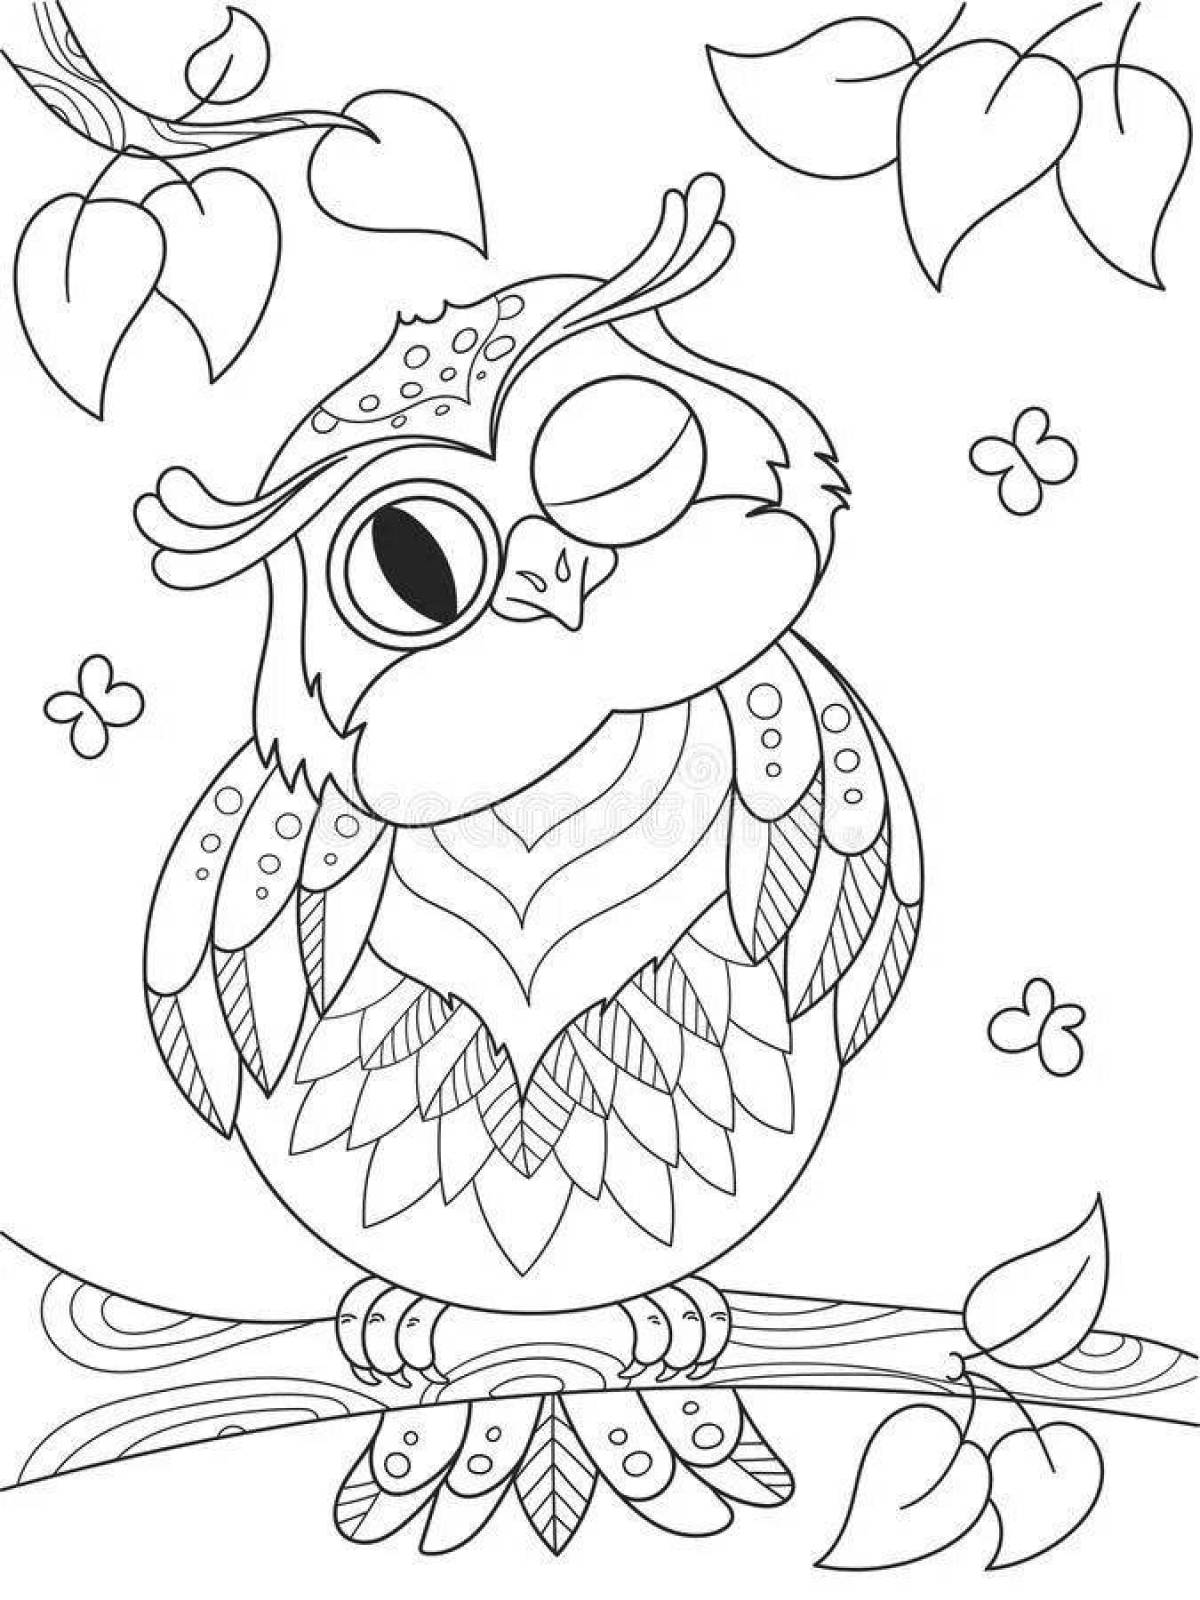 Coloring page wild owl on a tree